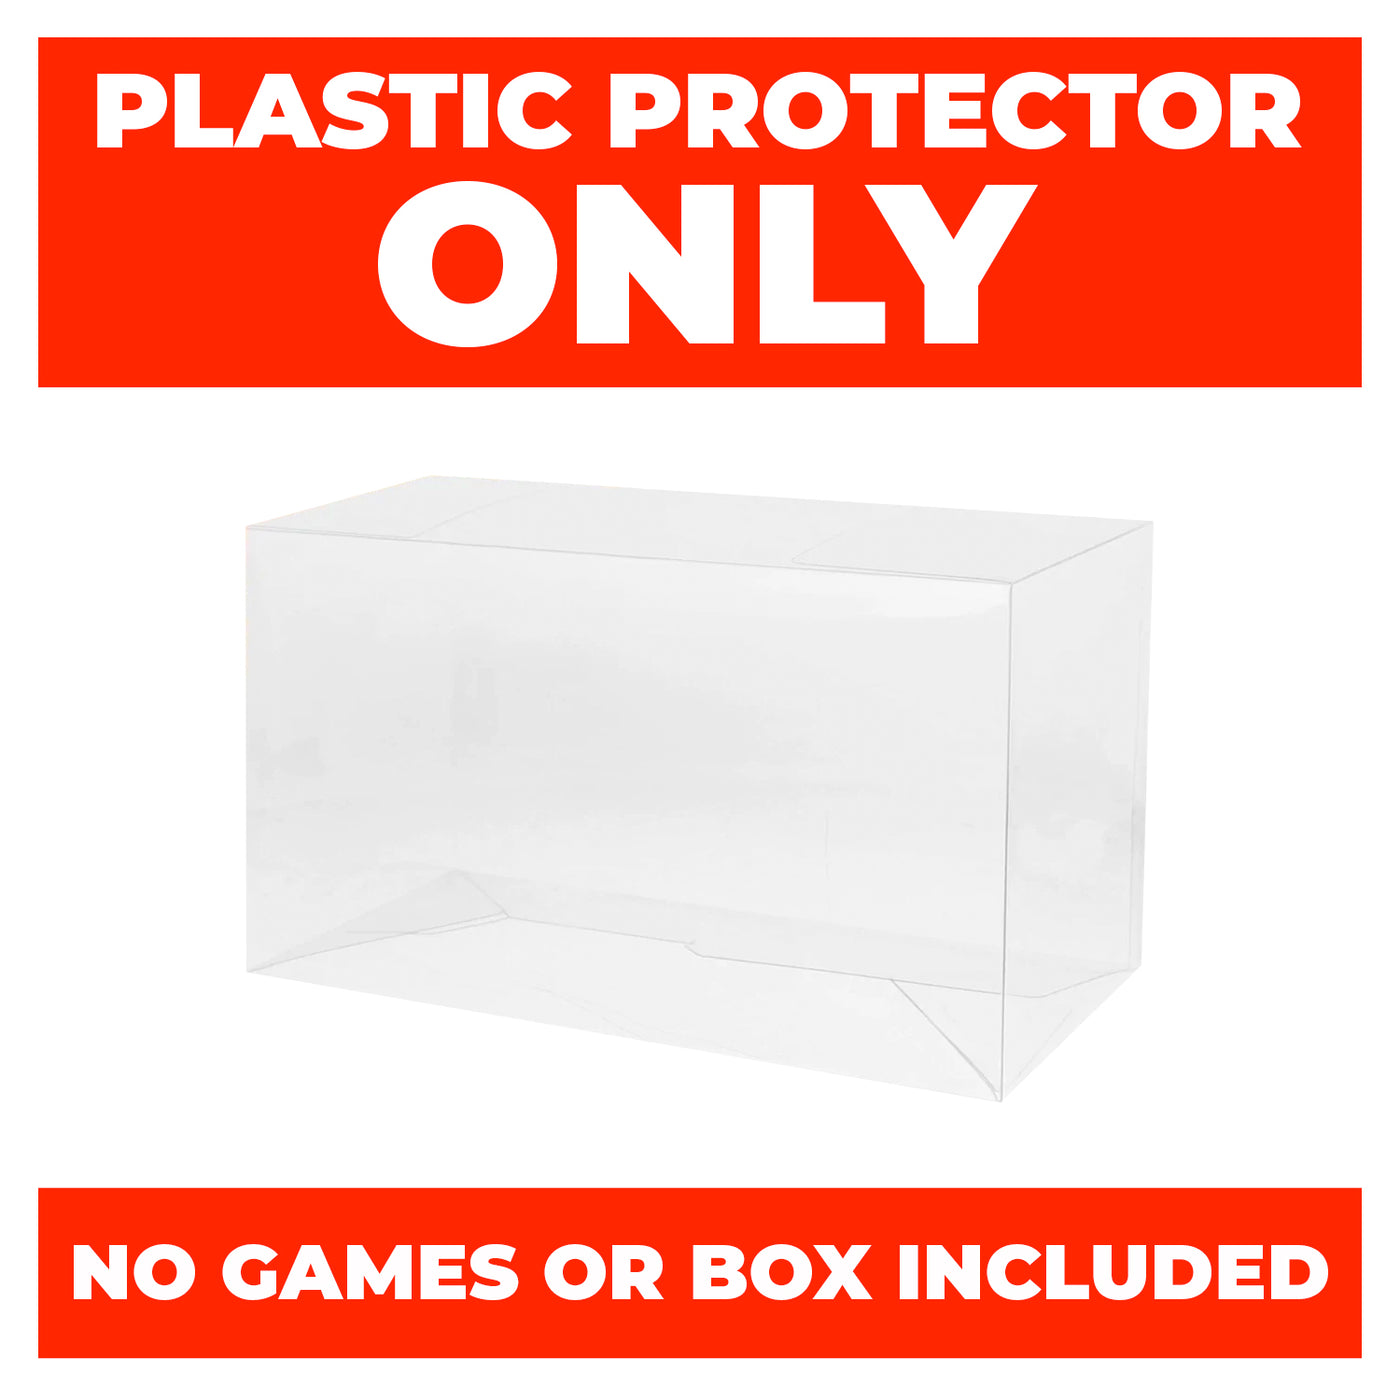 Plastic Protector for NEW Nintendo GAME & WATCH Boxes 0.50mm thick, UV & Scratch Resistant on The Pop Protector Guide by Display Geek